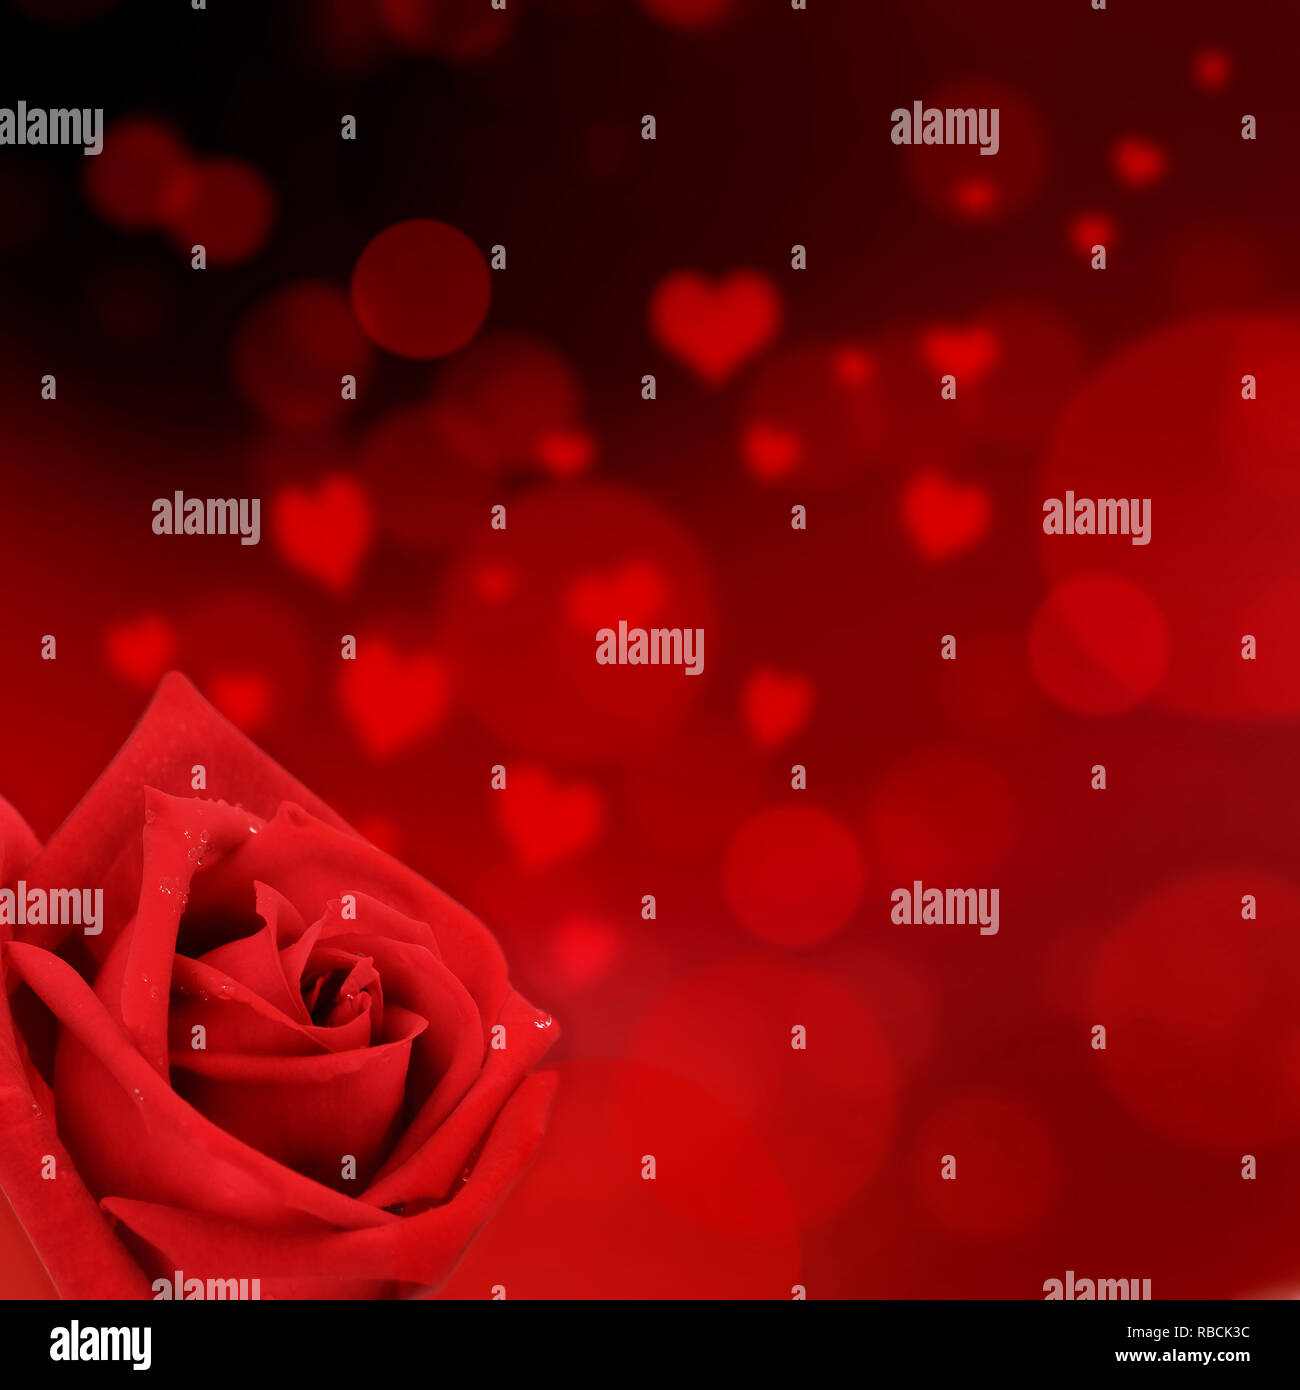 red rose on hearts shaped and red lights background in square size Stock Photo